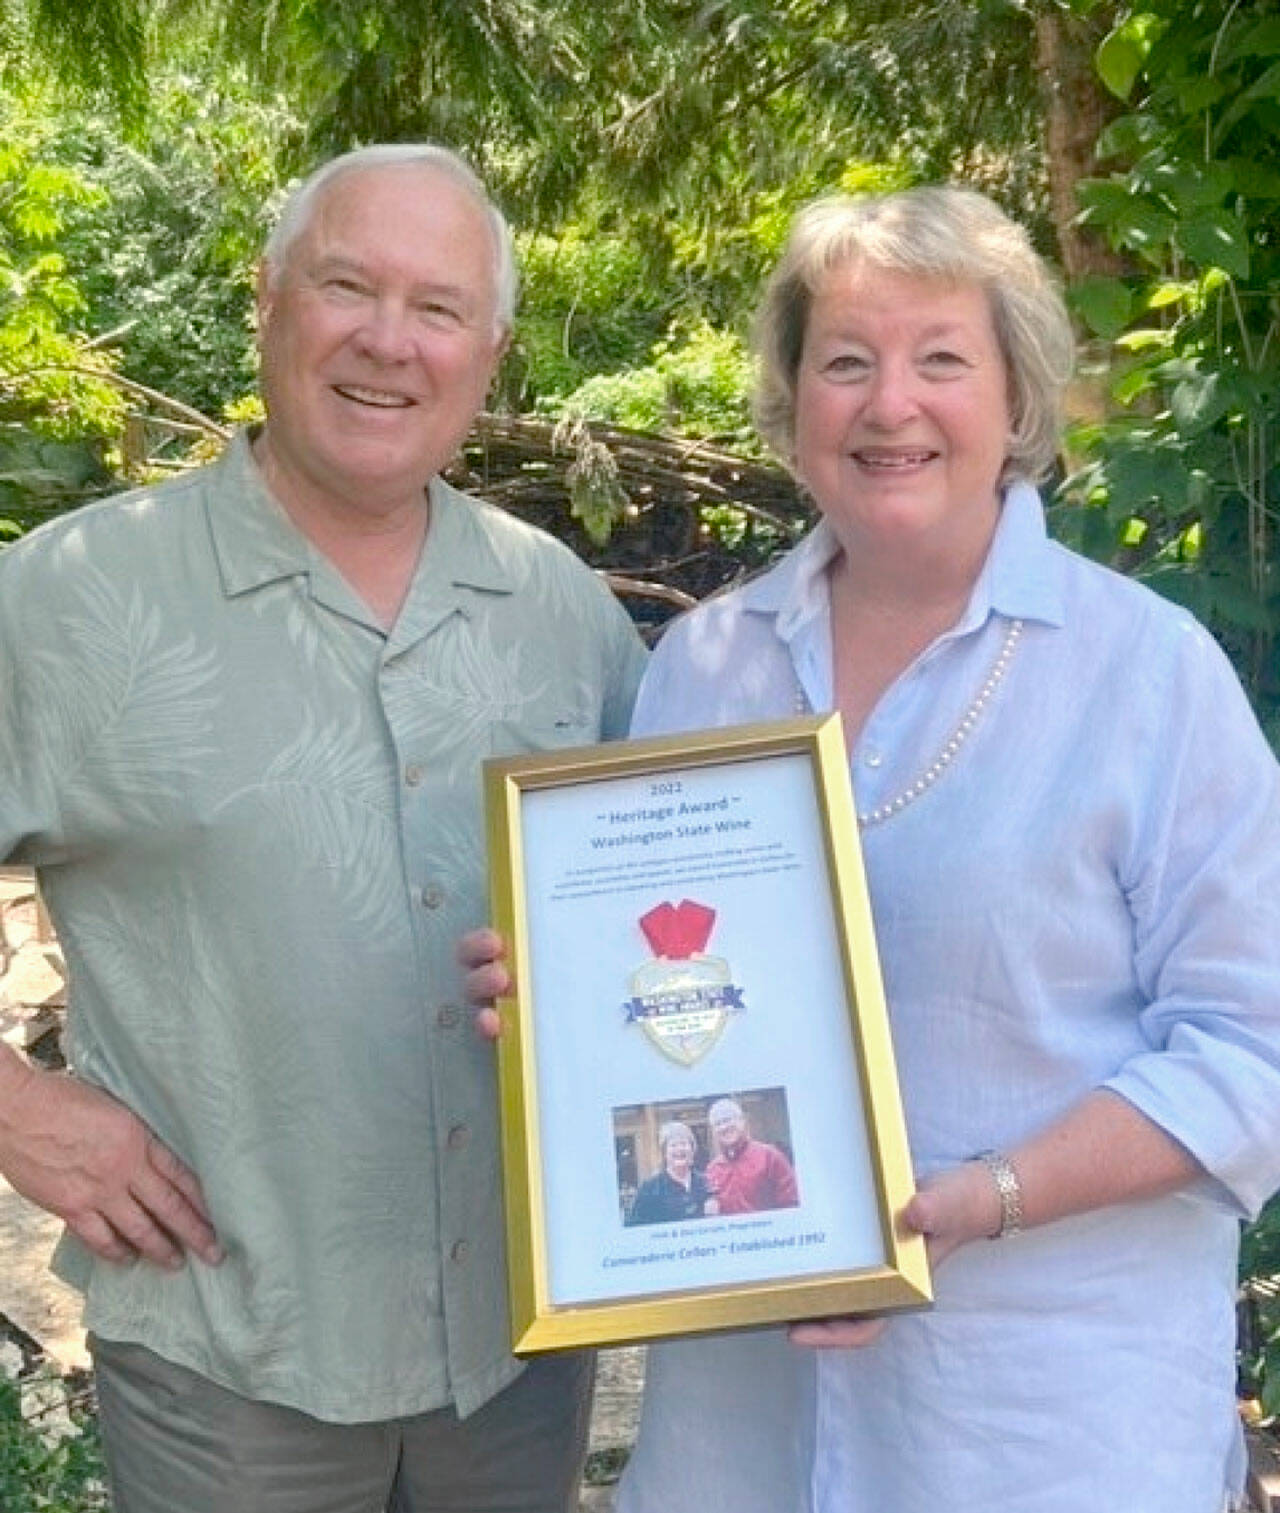 Don and Vicki Corson, owners of Camaraderie Cellars, earned a 2022 Washington state wine Heritage Award.